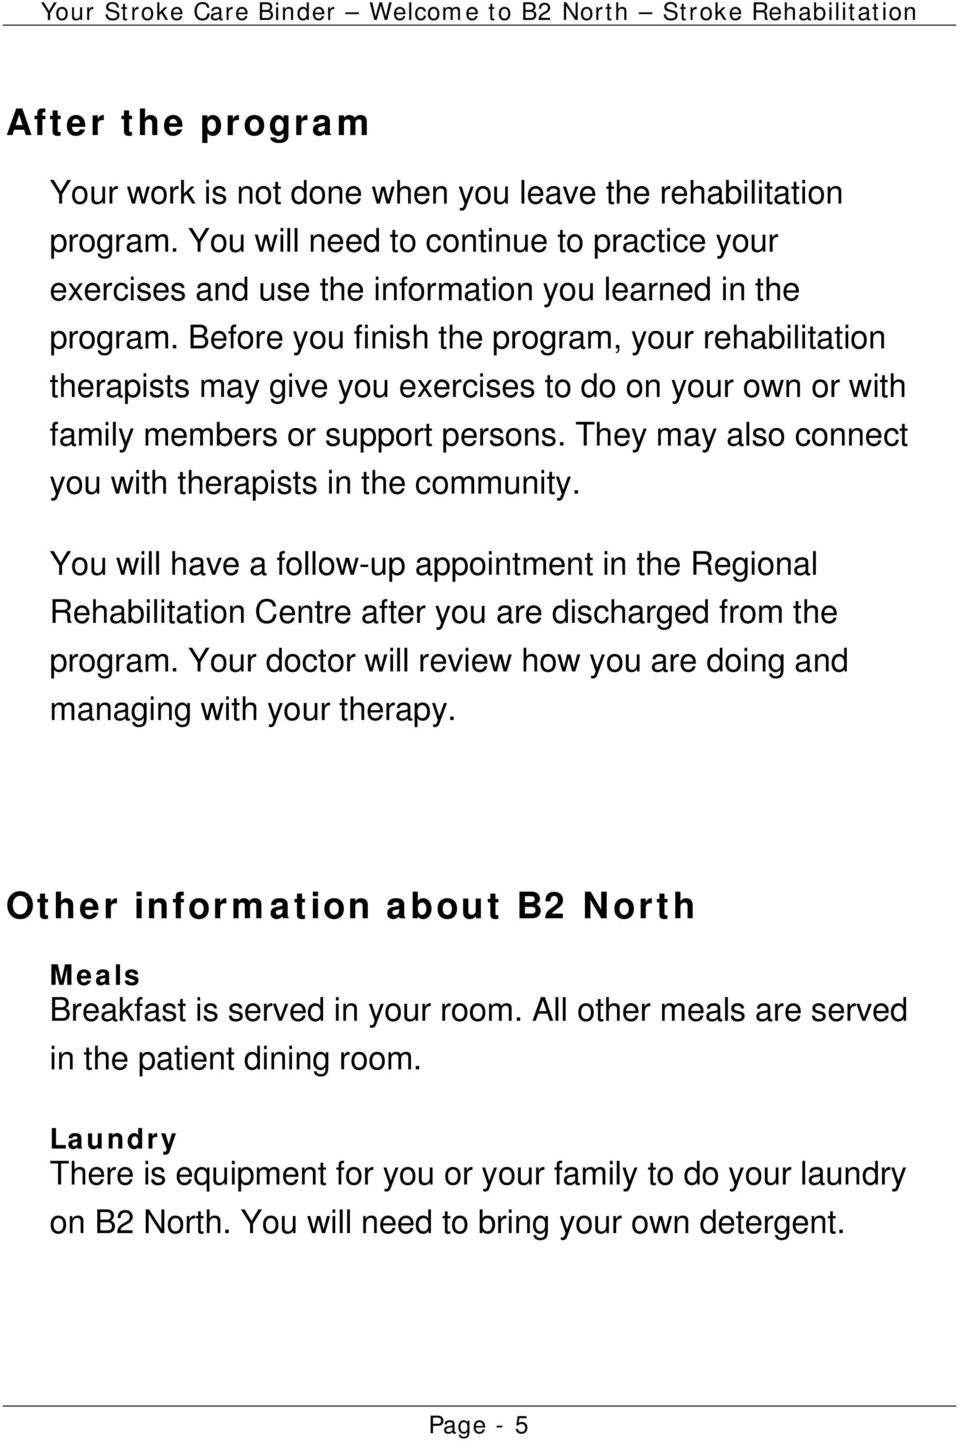 They may also connect you with therapists in the community. You will have a follow-up appointment in the Regional Rehabilitation Centre after you are discharged from the program.